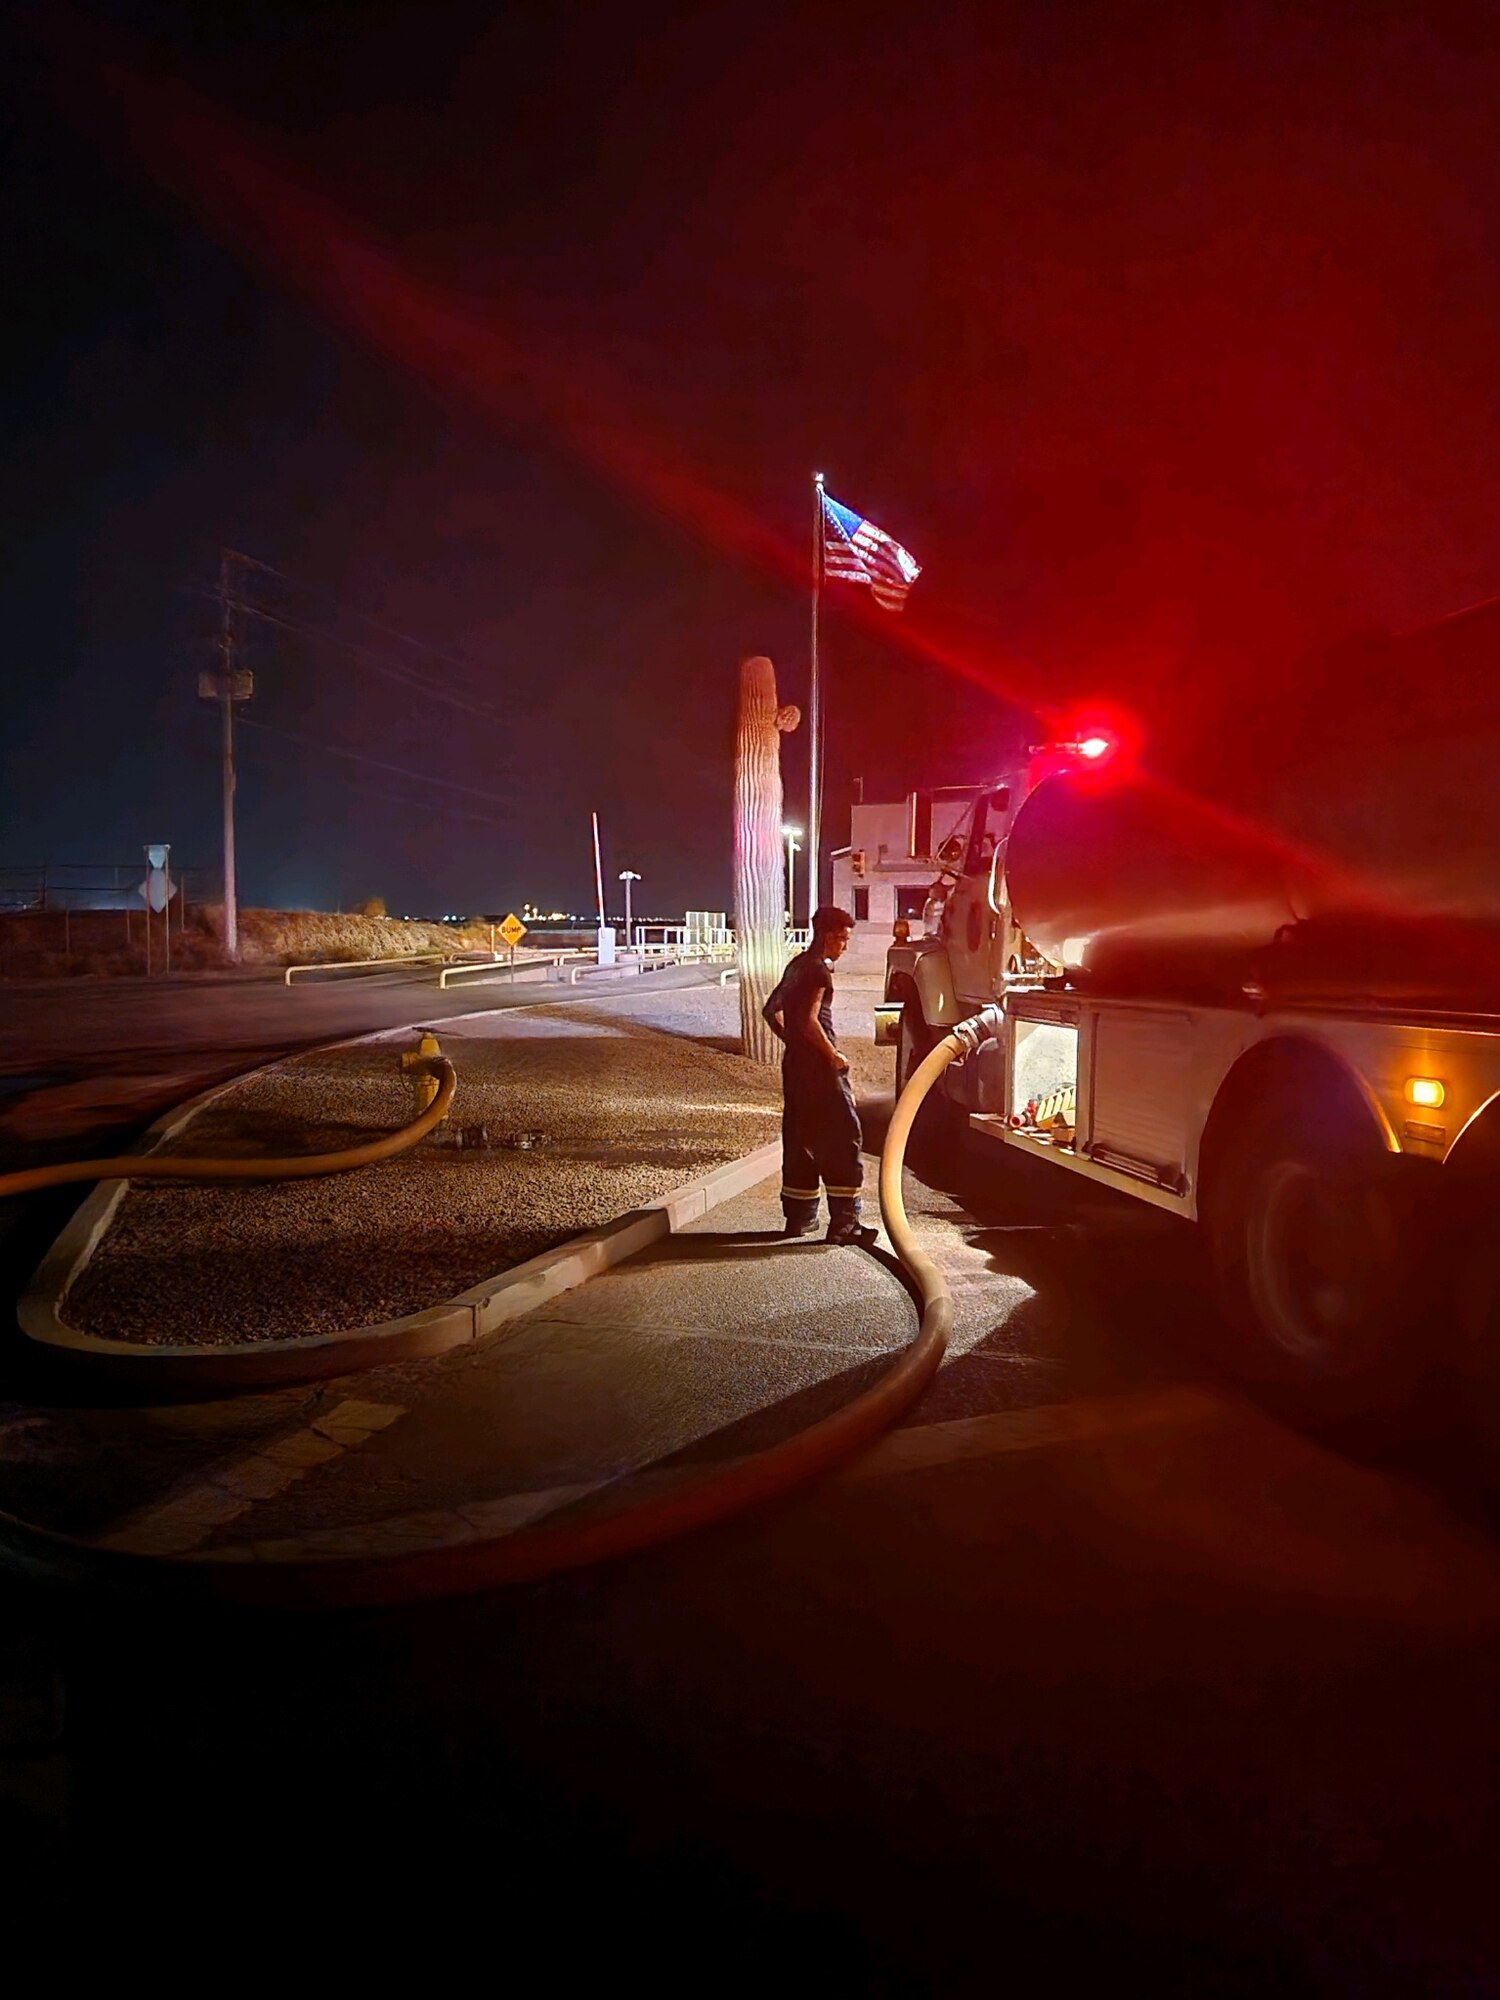 A 56th Civil Engineer Squadron firefighter adjusts water pressure on a water tanker in response to a 3-acre fire at the Glendale Municipal Landfill, around 9 p.m., July 19, 2023, in Glendale, Arizona.